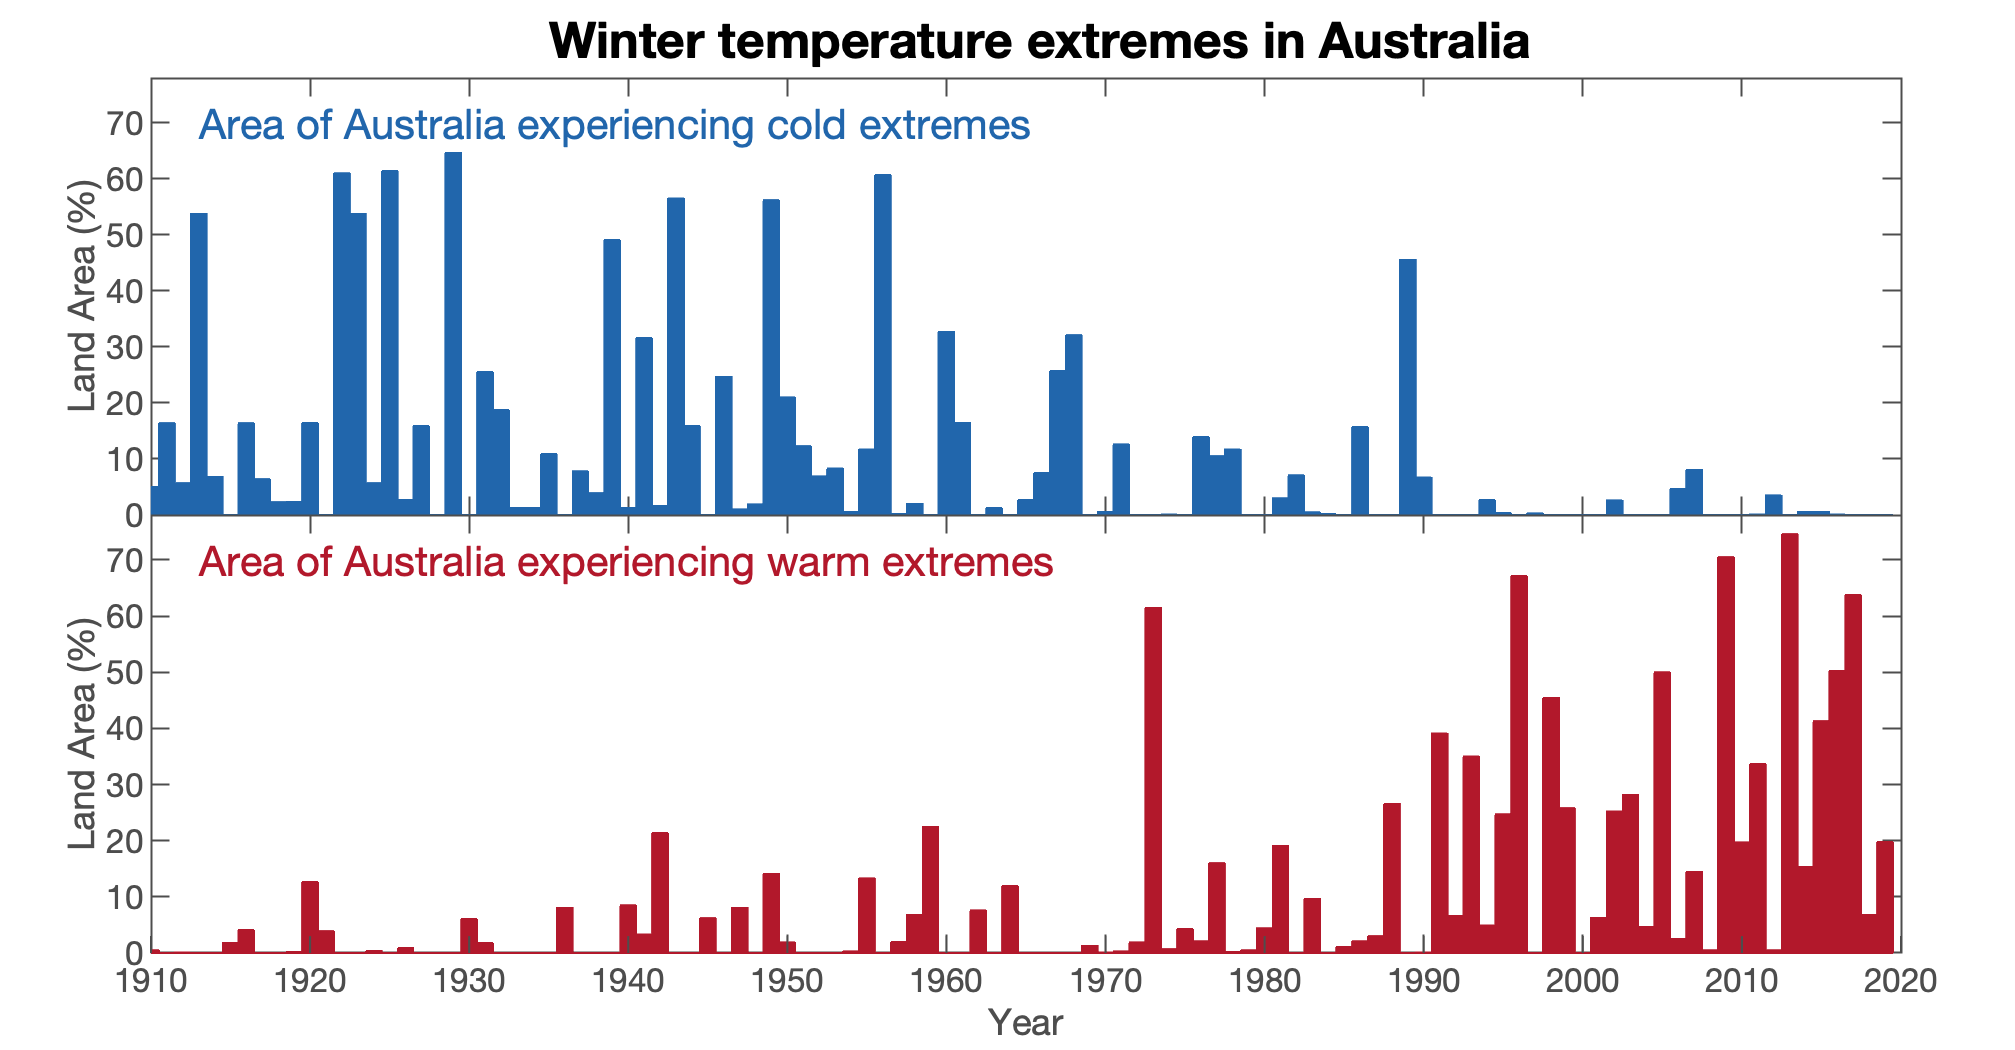 Extreme cold and warm winter temperatures in Australia